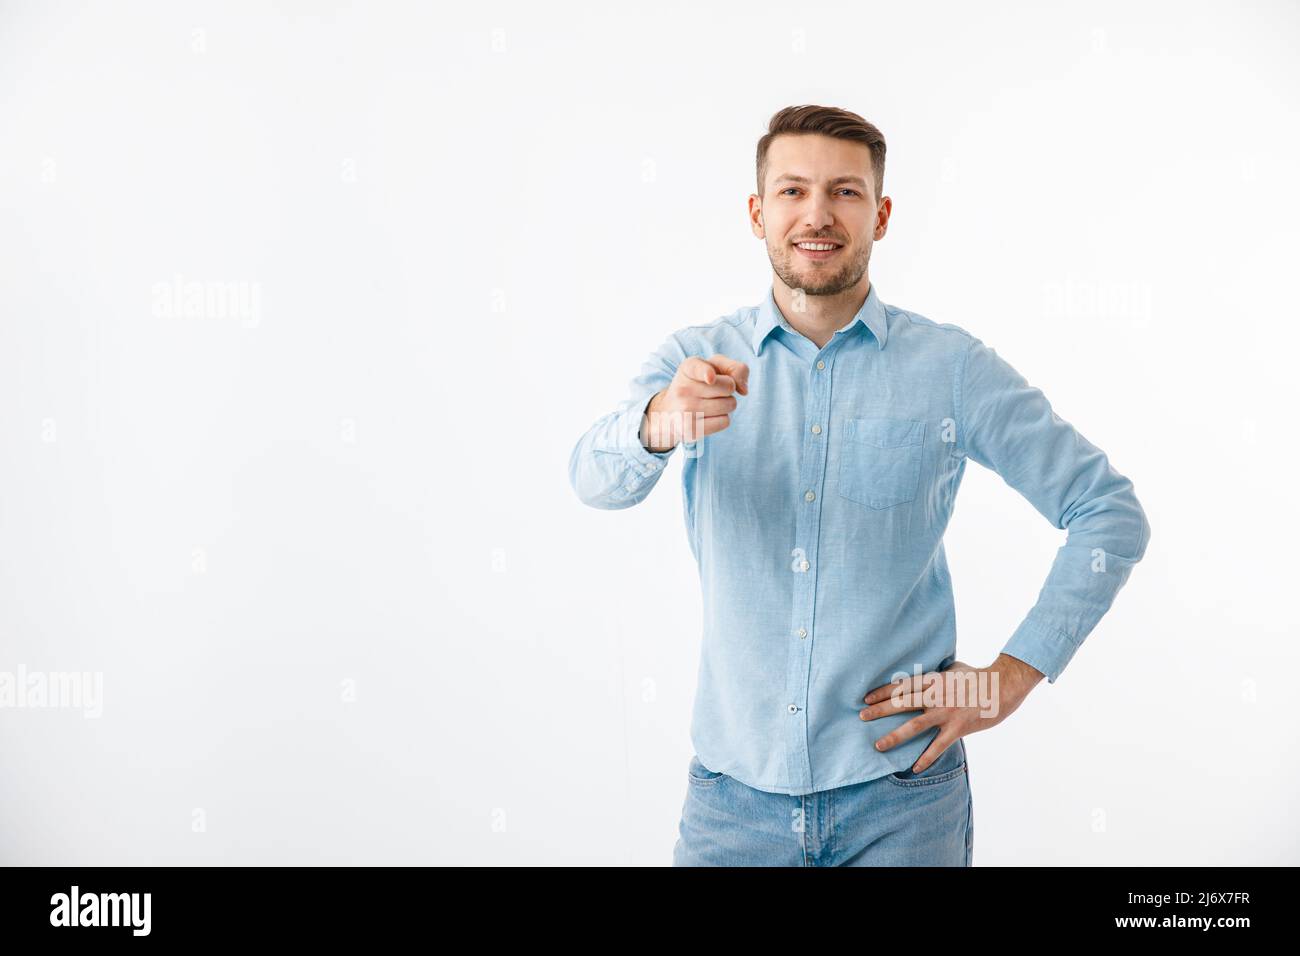 A young man in a blue shirt gestures. Motivational poster, are you ready. Copy Space. Stock Photo